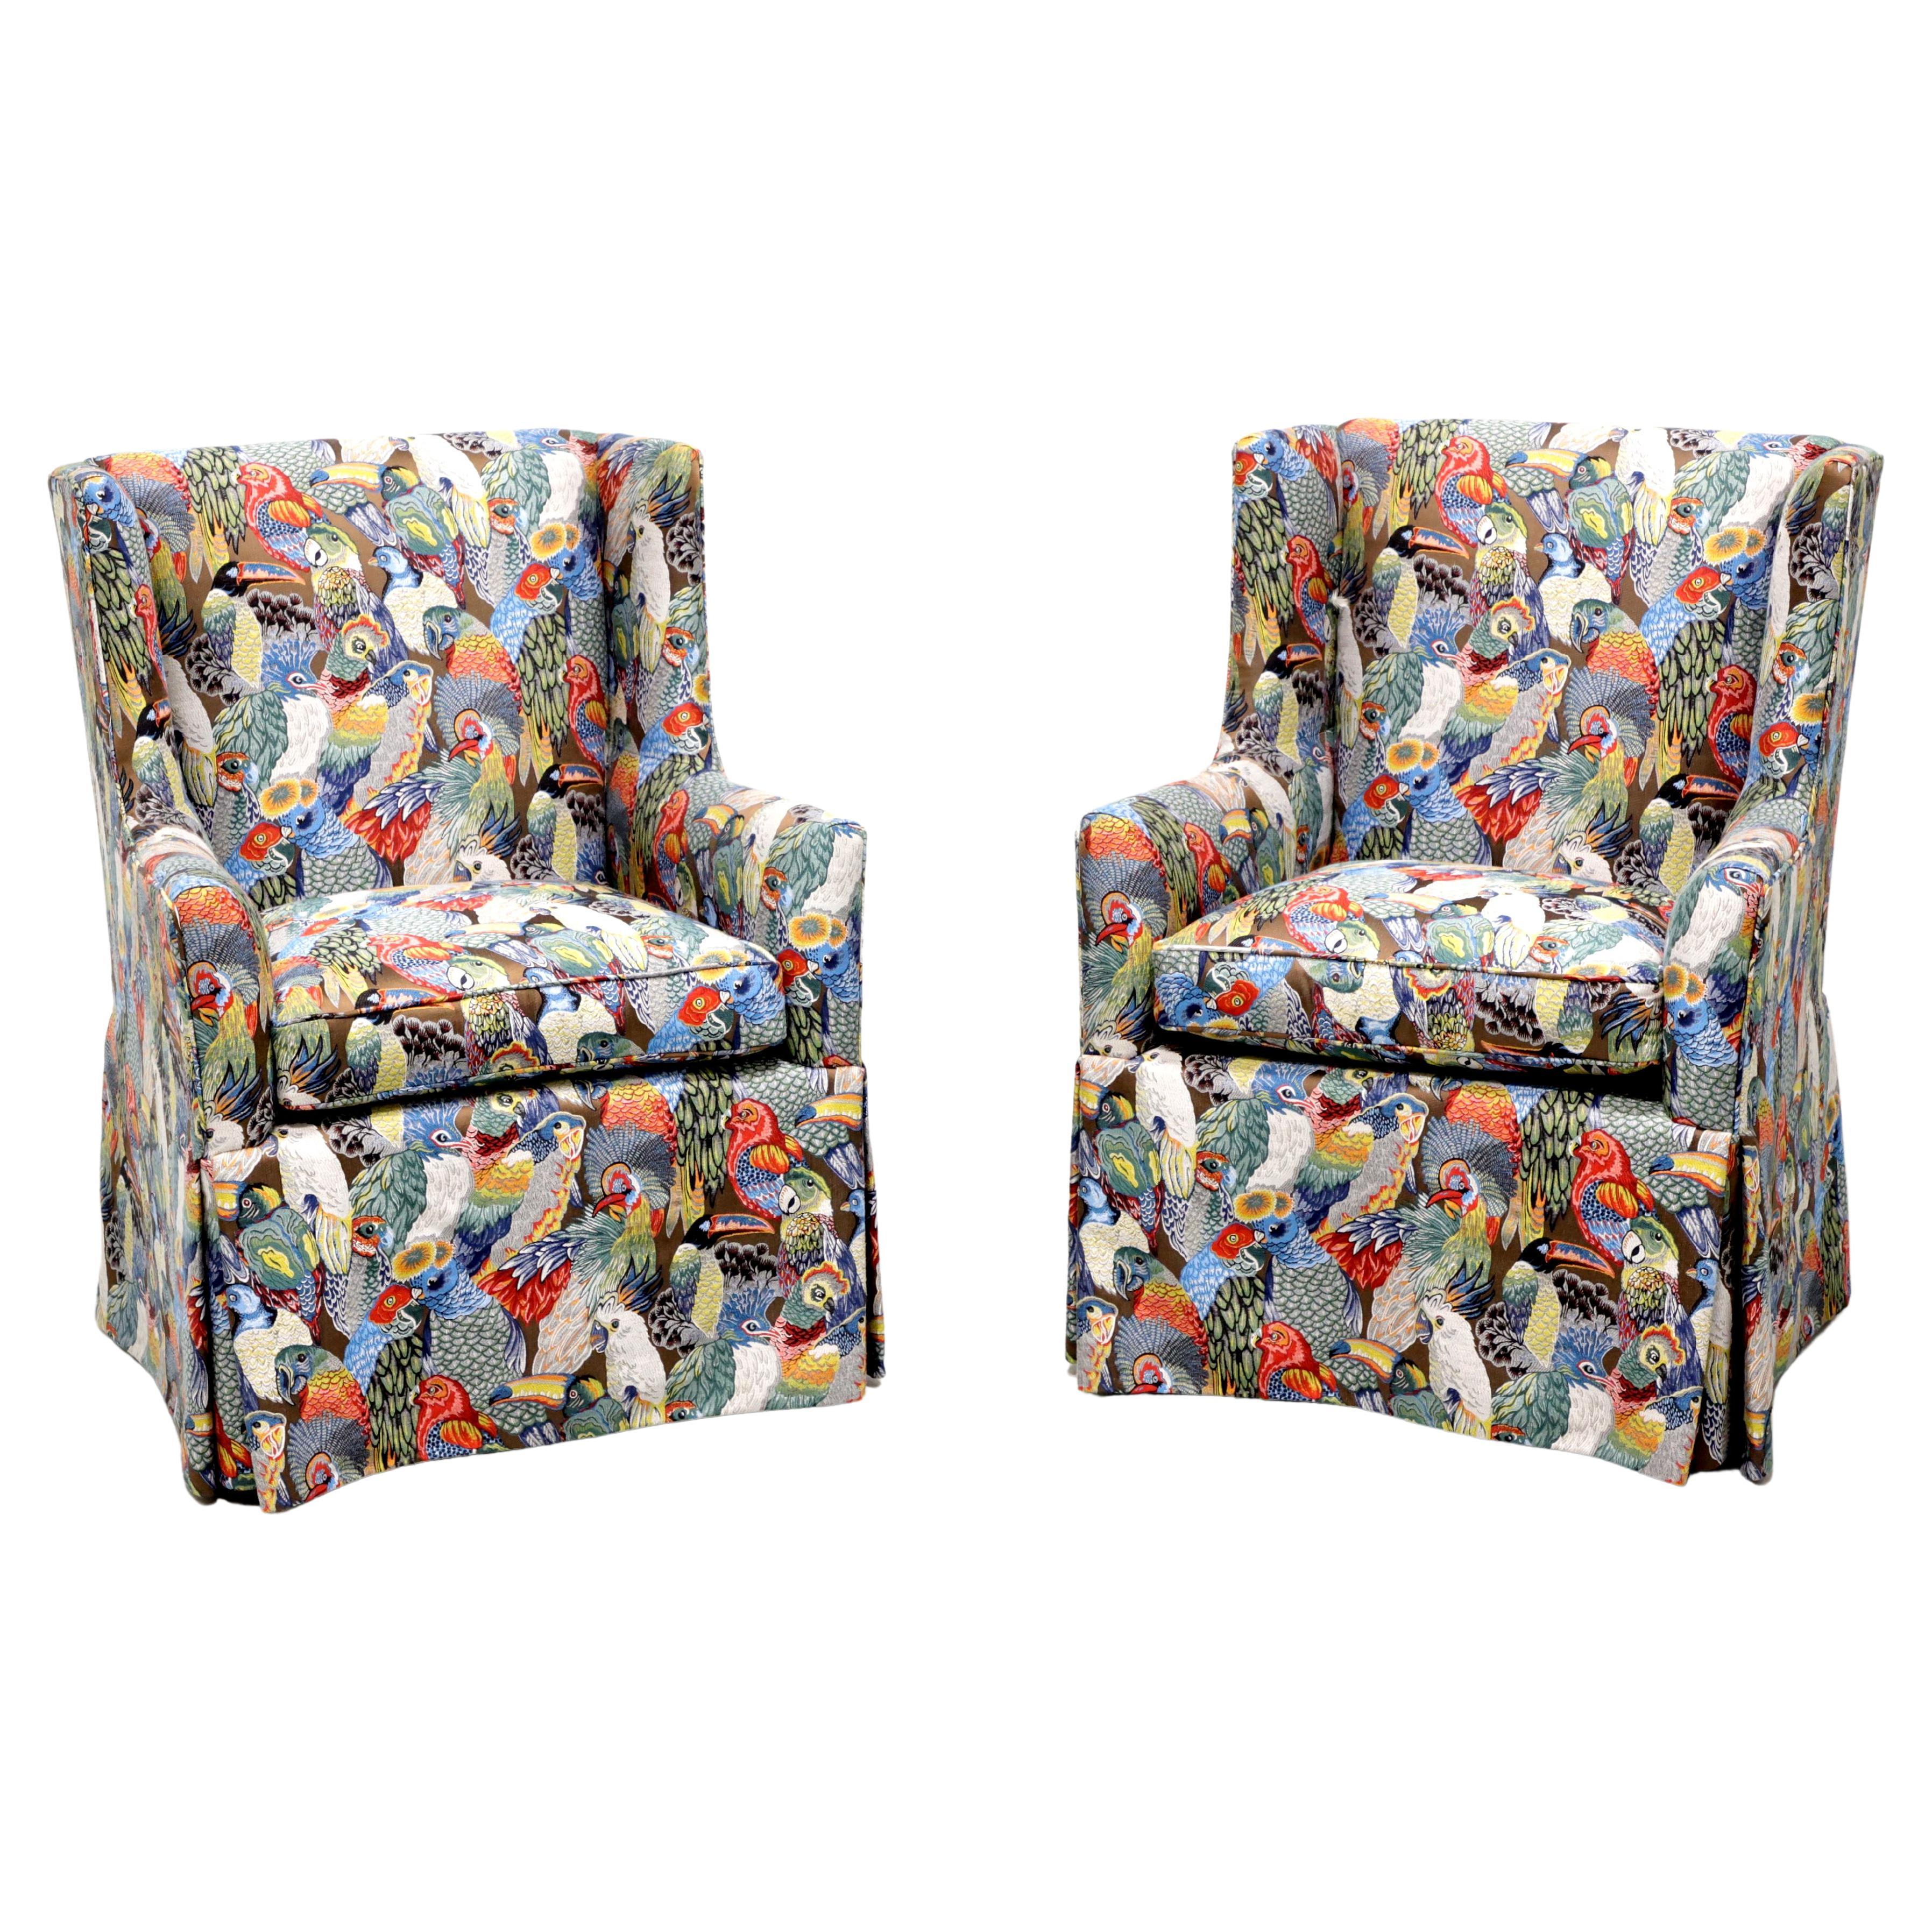 21st Century Traditional Club Chairs in Colorful Bird Themed Fabric - Pair For Sale